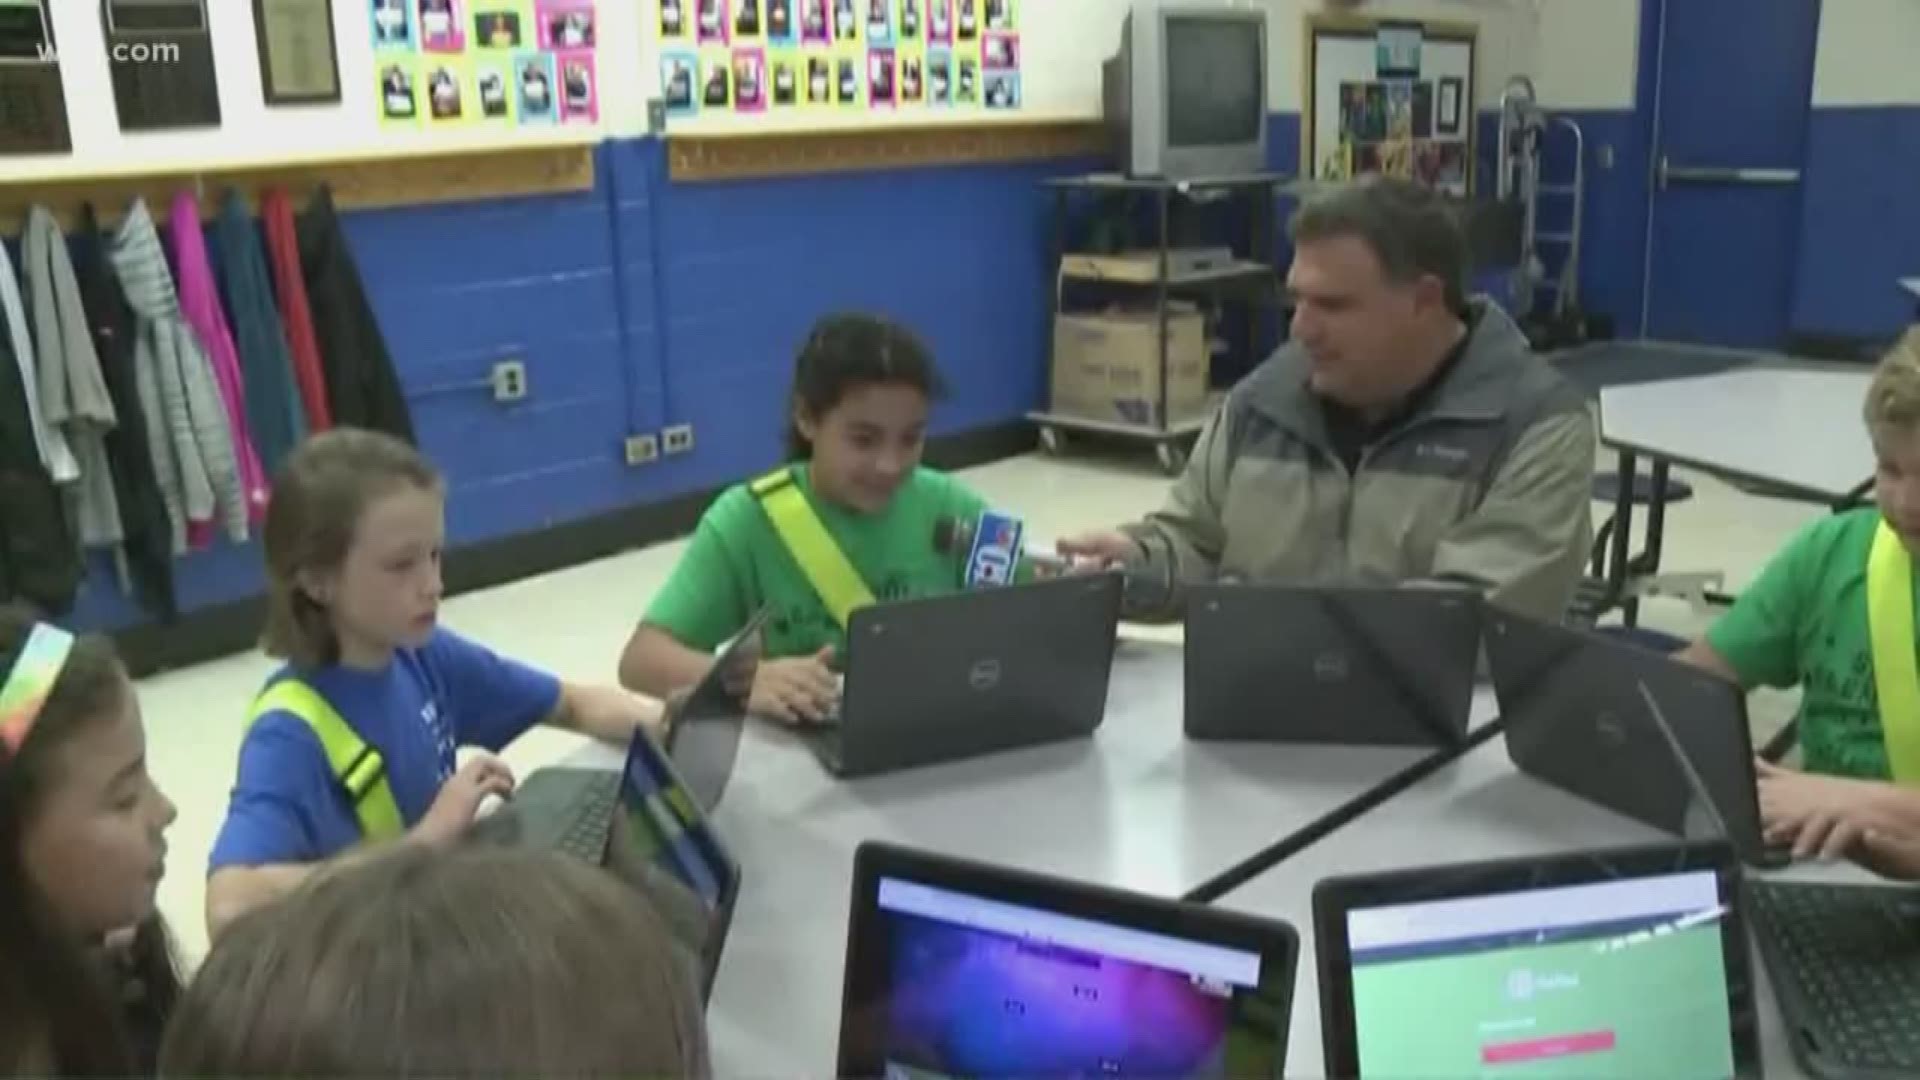 10News Anchor Russell Biven was live (and tardy) at this cool school learning about reflex math.